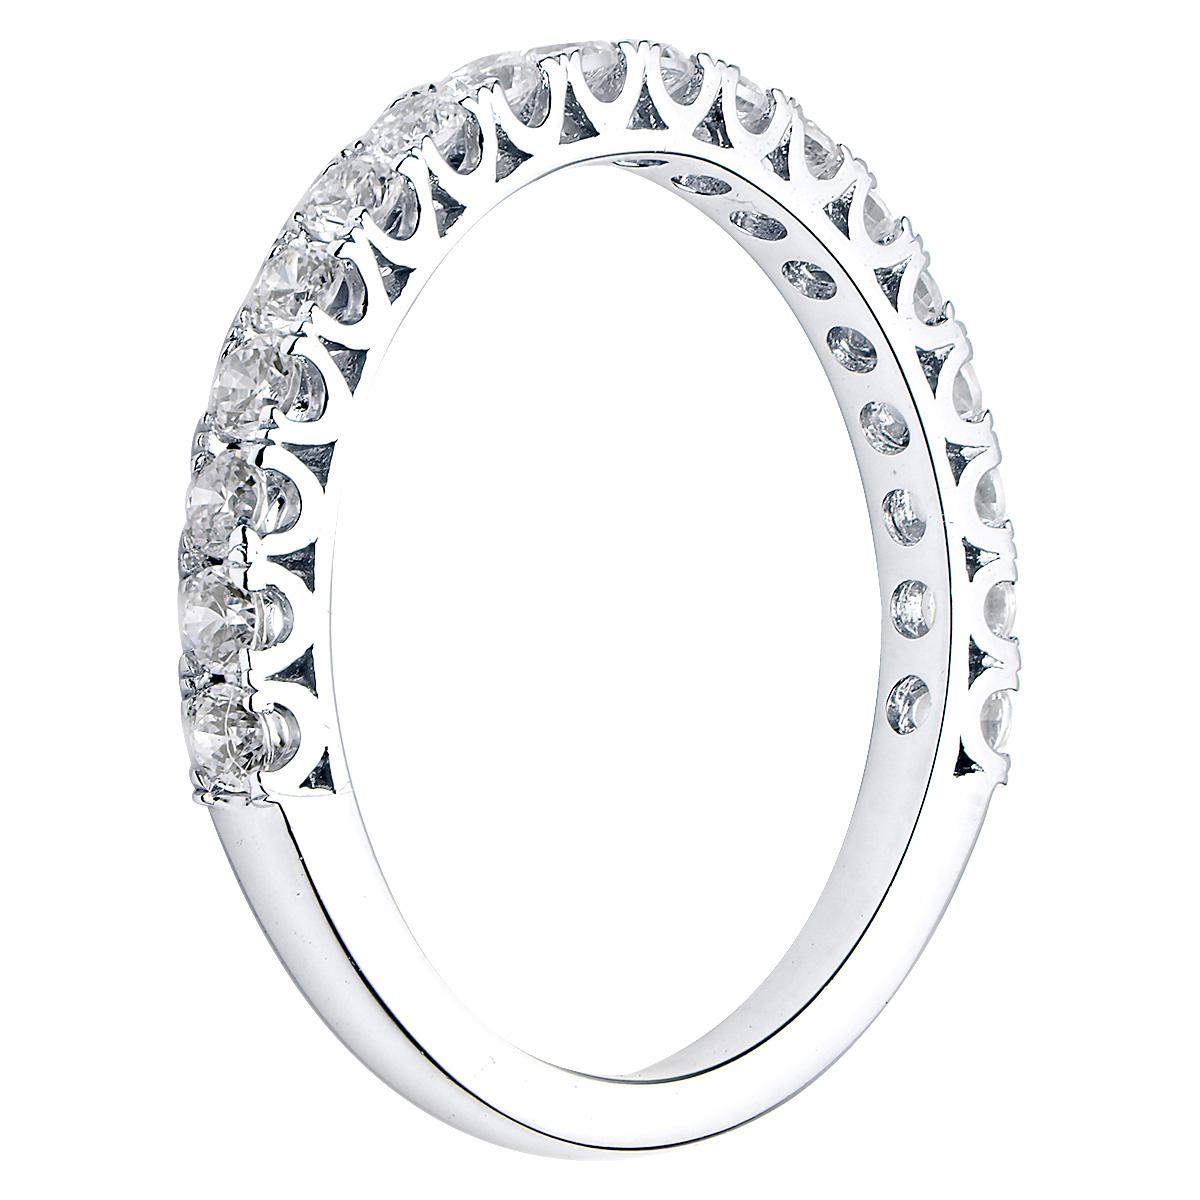 This beautiful classic diamond band has diamonds approximately 2/3 the way around the band that are secured with beautiful prongs. There are 18 round VS2, G color diamonds totaling 0.52 carats which are set in 1.7 grams of 18 karat white gold. This